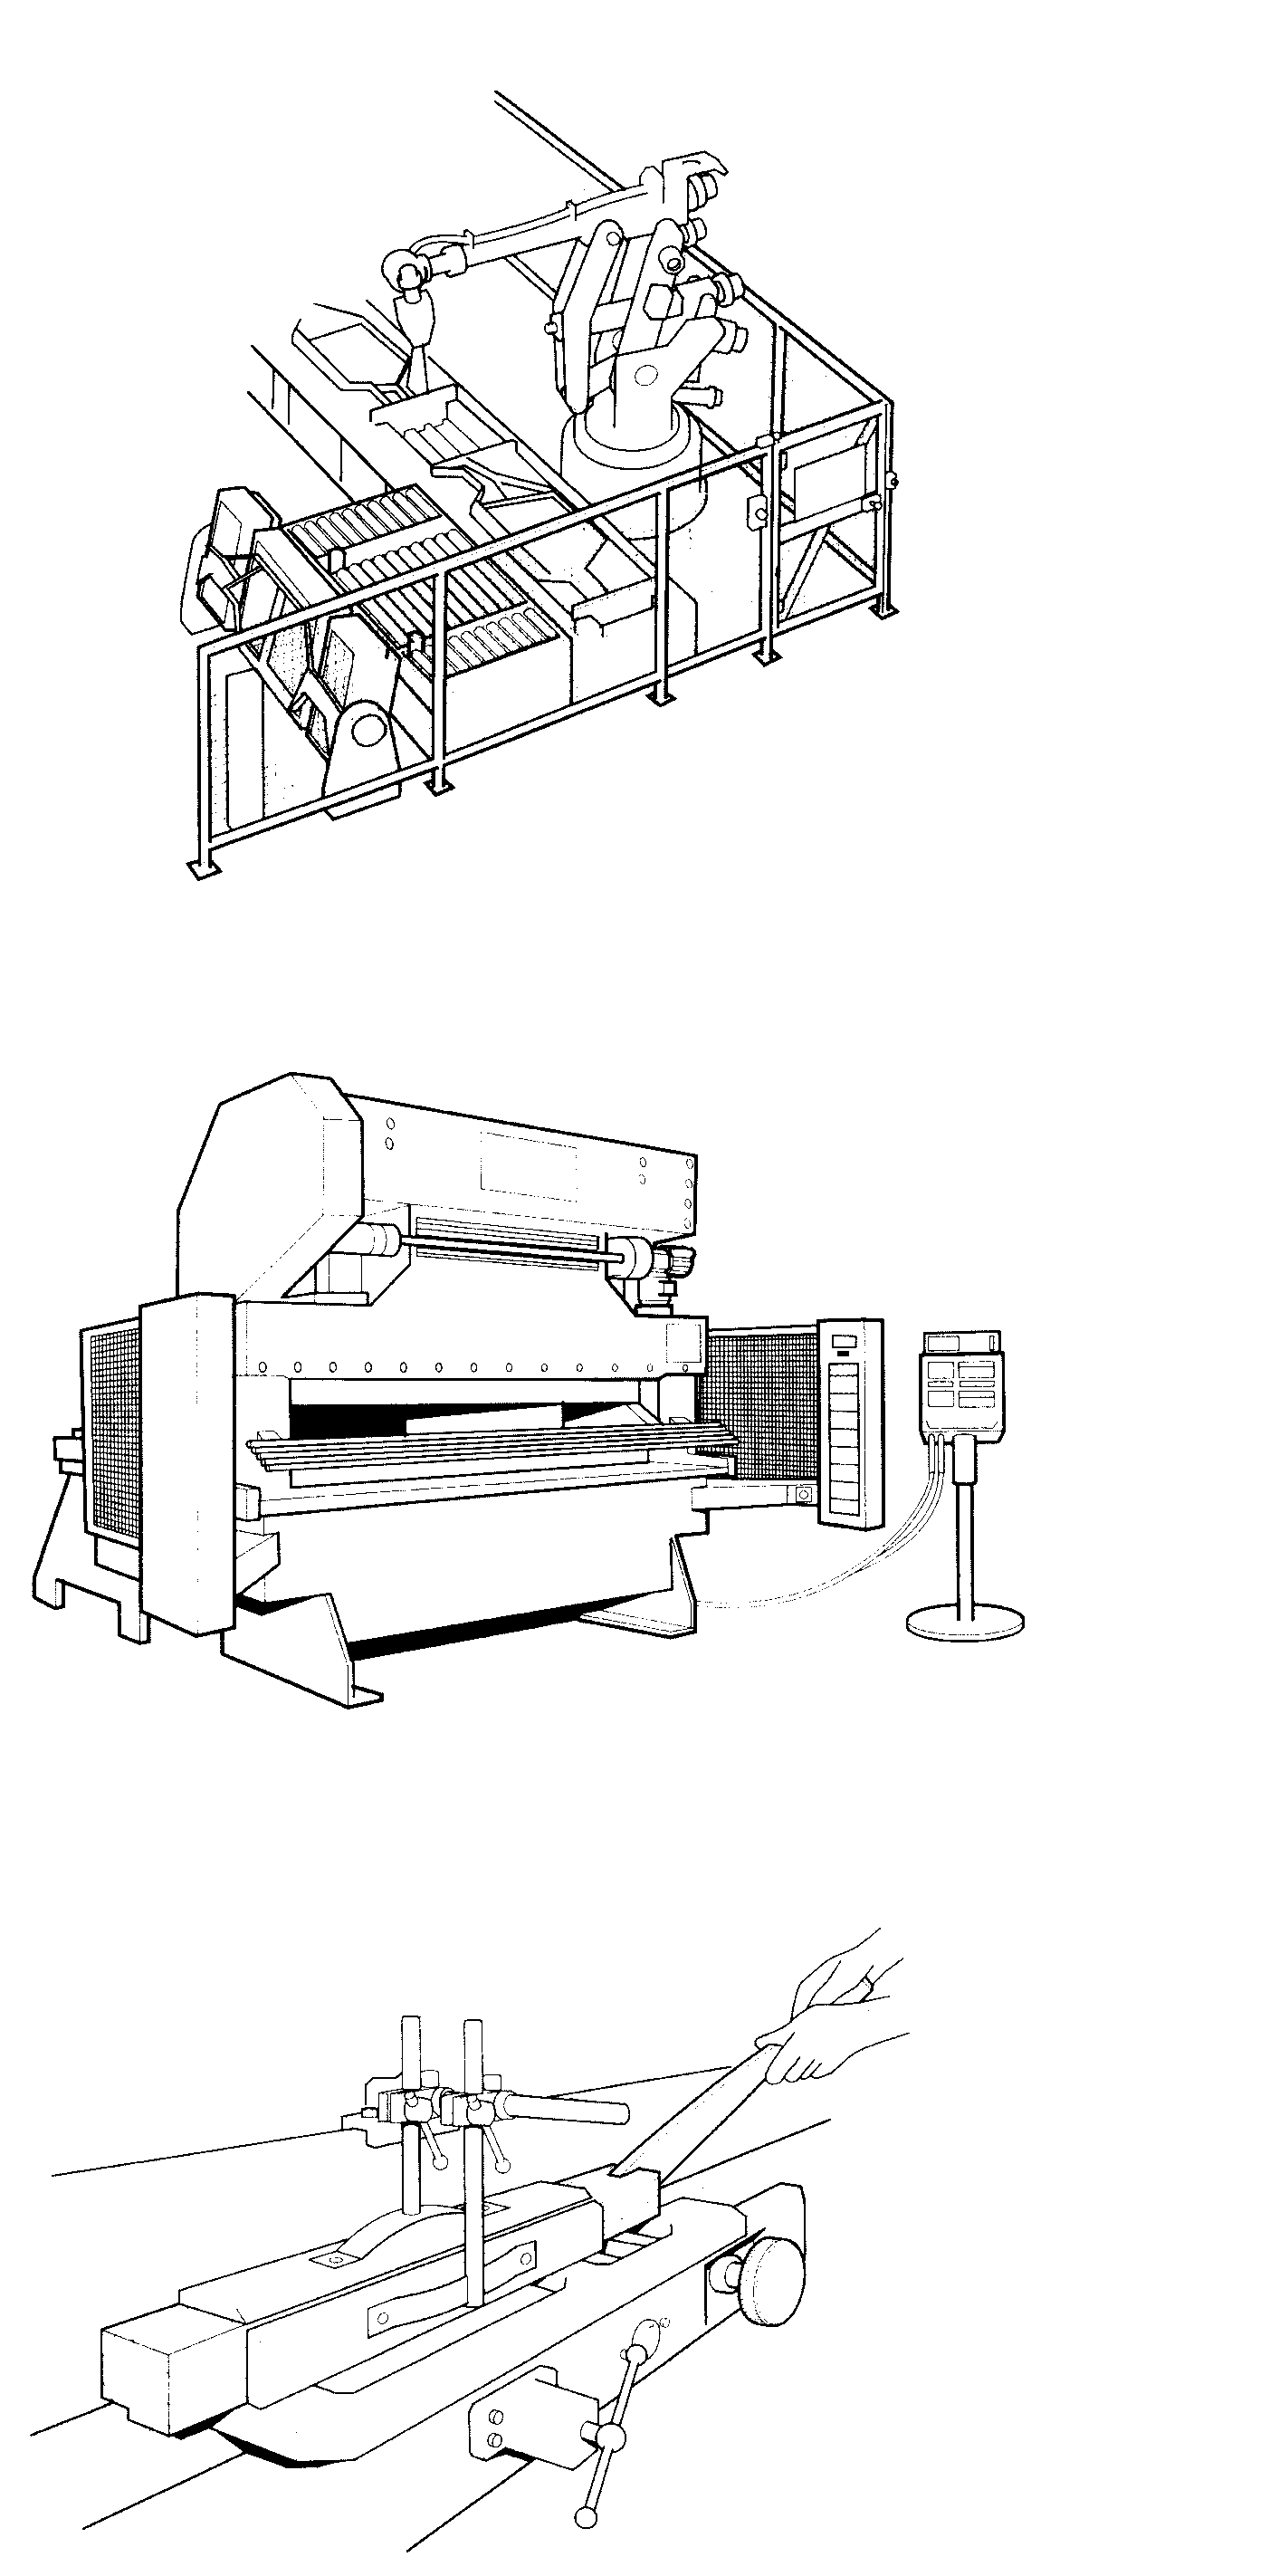 Figure 2 Perimeter fence guard with fixed panels and interlocking access door
Figure 3 Photoelectric device fitted to a press brake
Figure 4 A push stick in use at a woodworking machine
